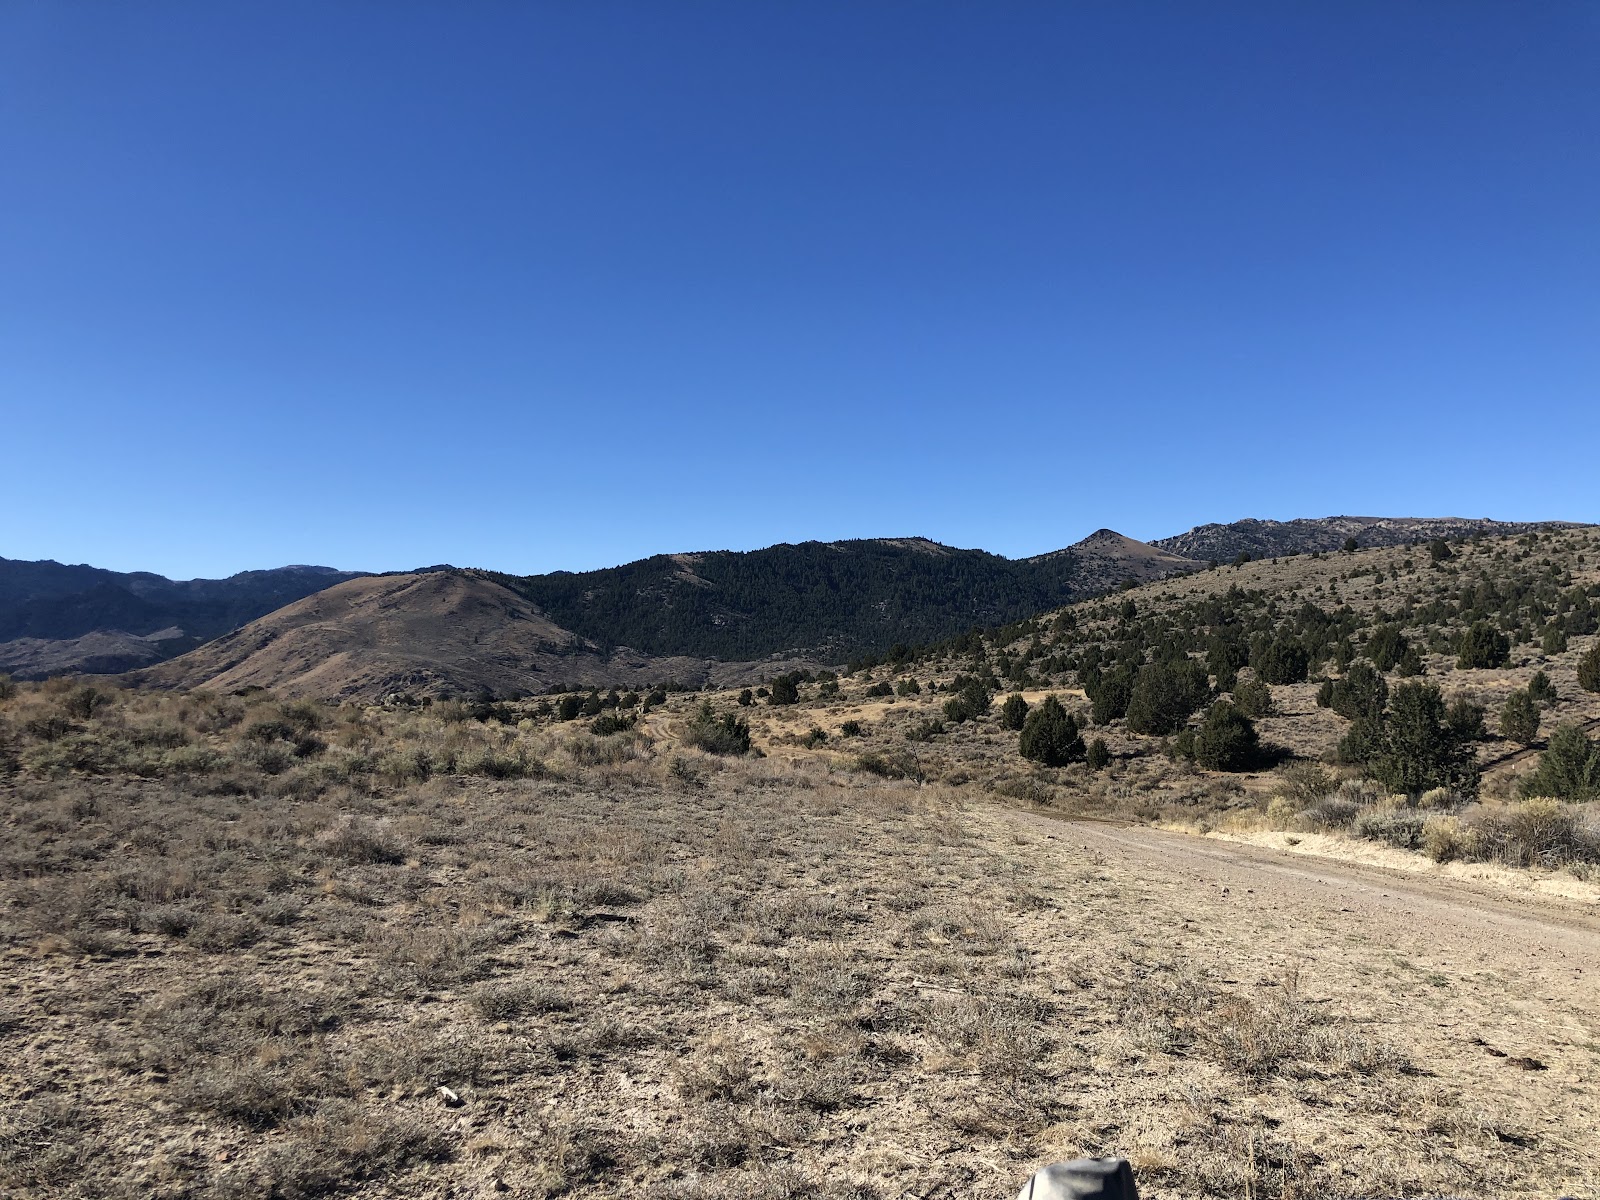 In the forefront is an open space of bunchgrasses gone to seed. To the right is a dirt road passing foothills dotted by juniper trees and leading off into mountains against a clear blue sky. 